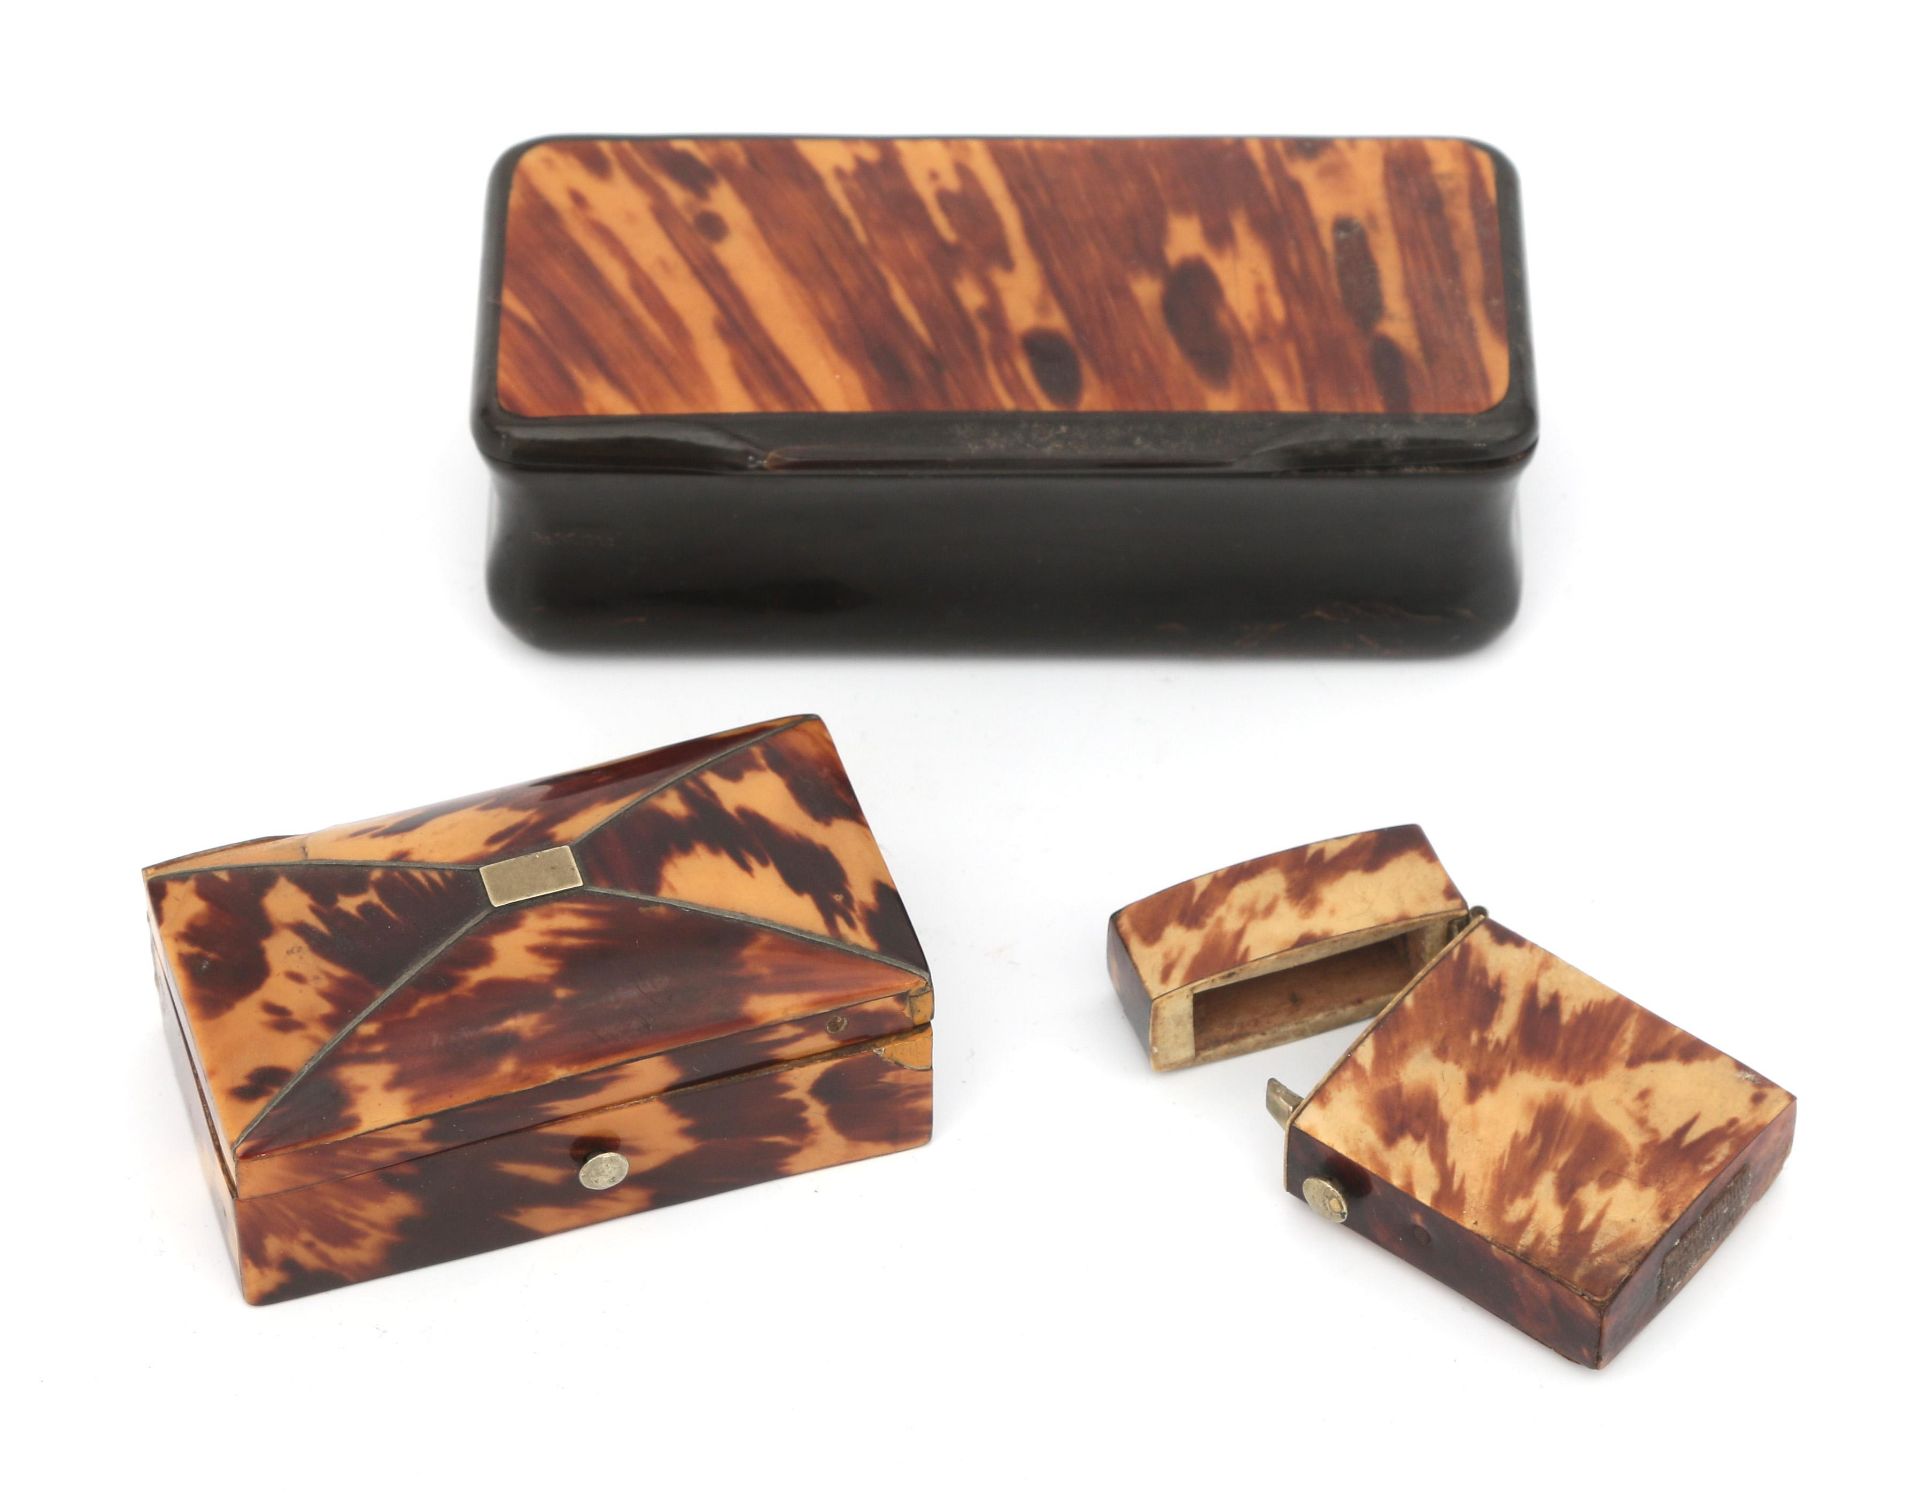 Two tortoise shell boxes and tinder box, 19th/20th century. Signs of wear. Largest size 3,5 x 10,8